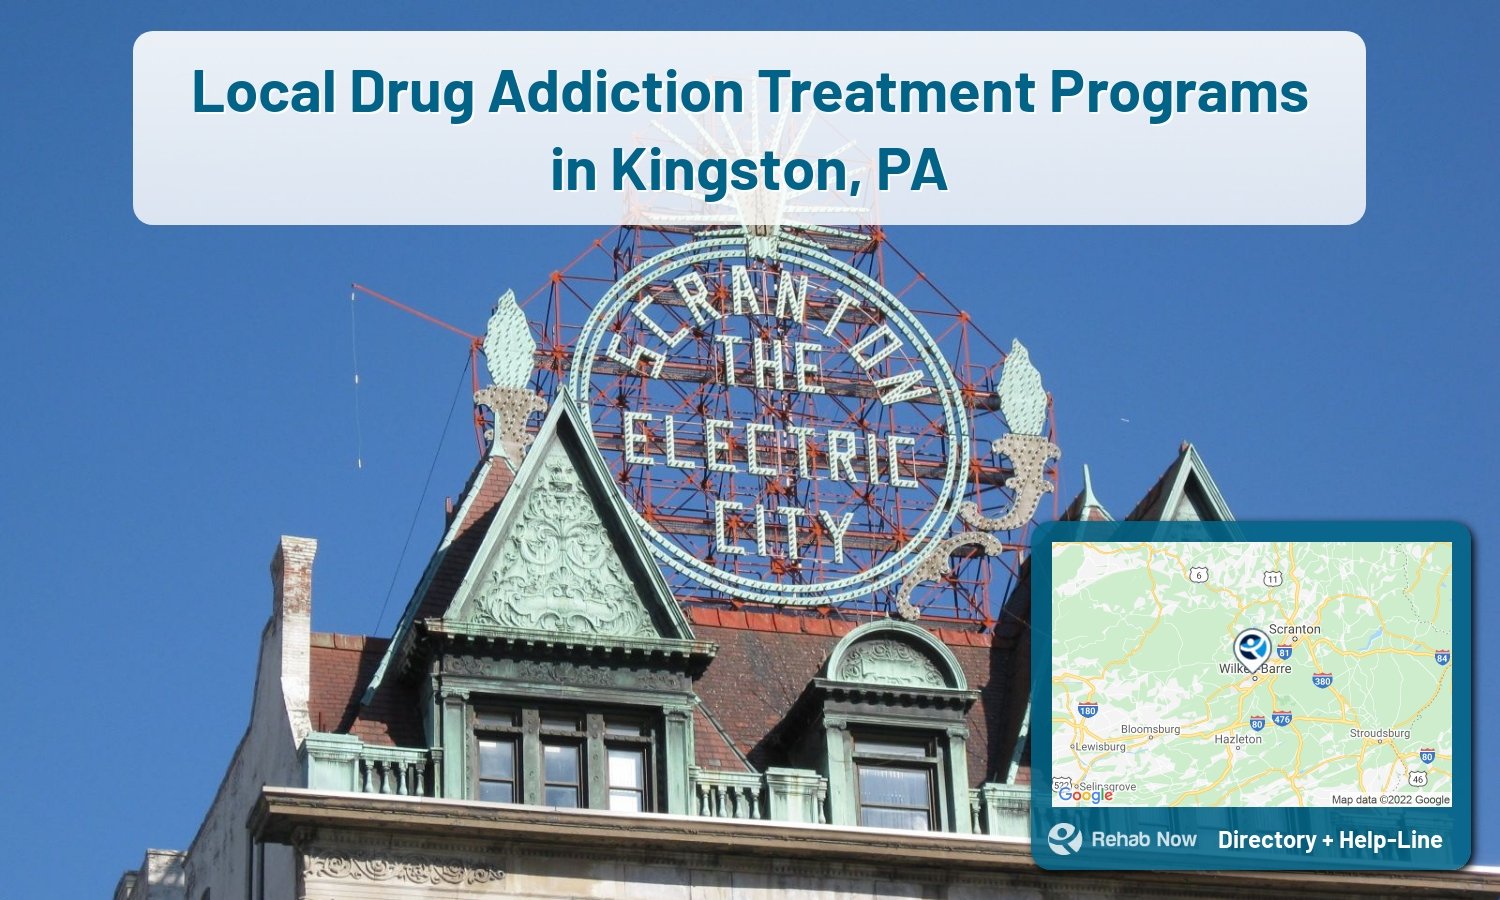 Kingston, PA Treatment Centers. Find drug rehab in Kingston, Pennsylvania, or detox and treatment programs. Get the right help now!